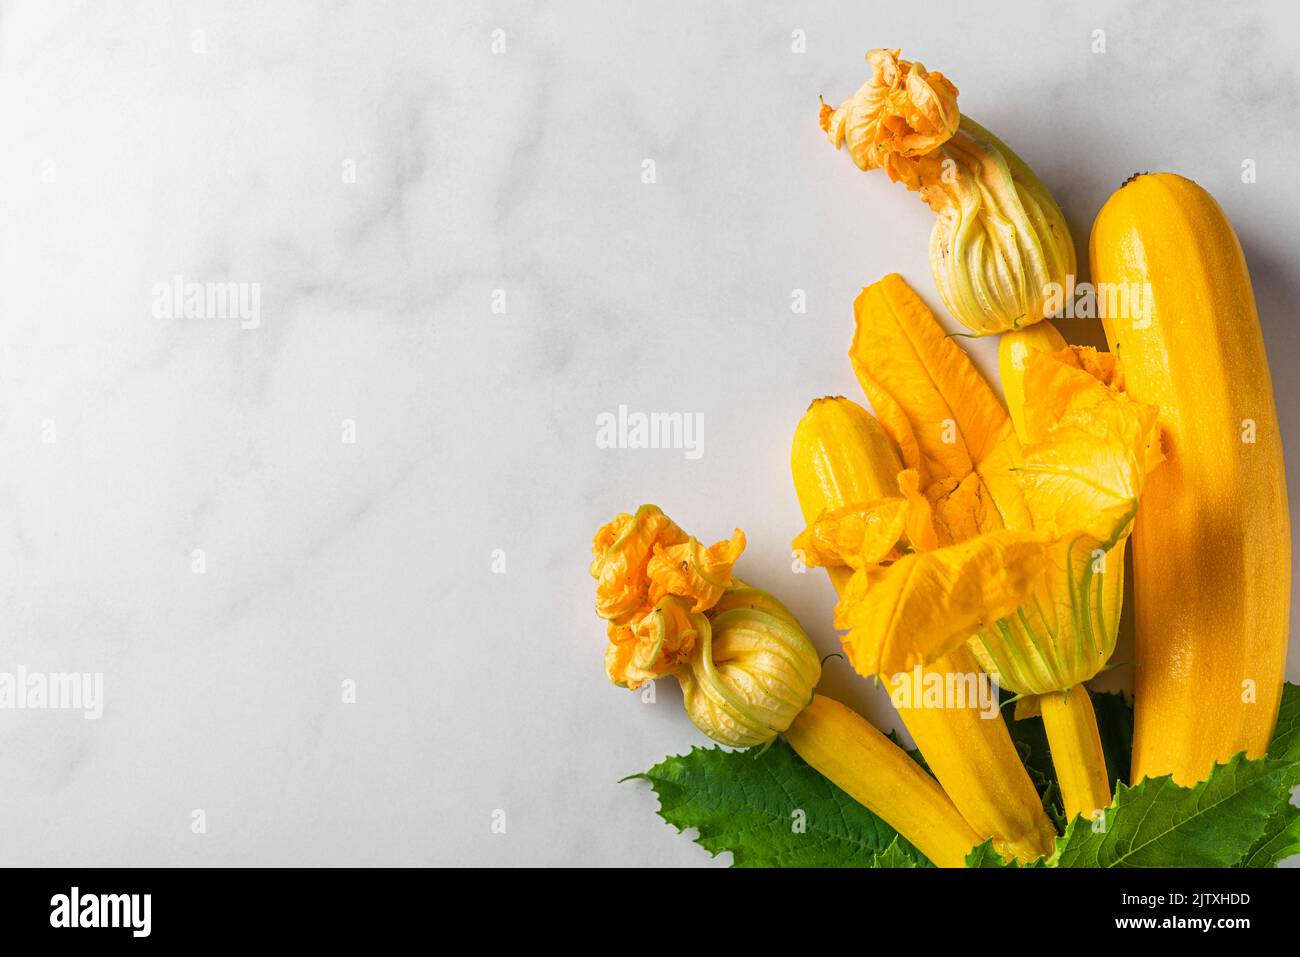 Fresh yellow zucchini or squash with flowers on white background. Top view with copy space. Fresh harvested vegetables Stock Photo